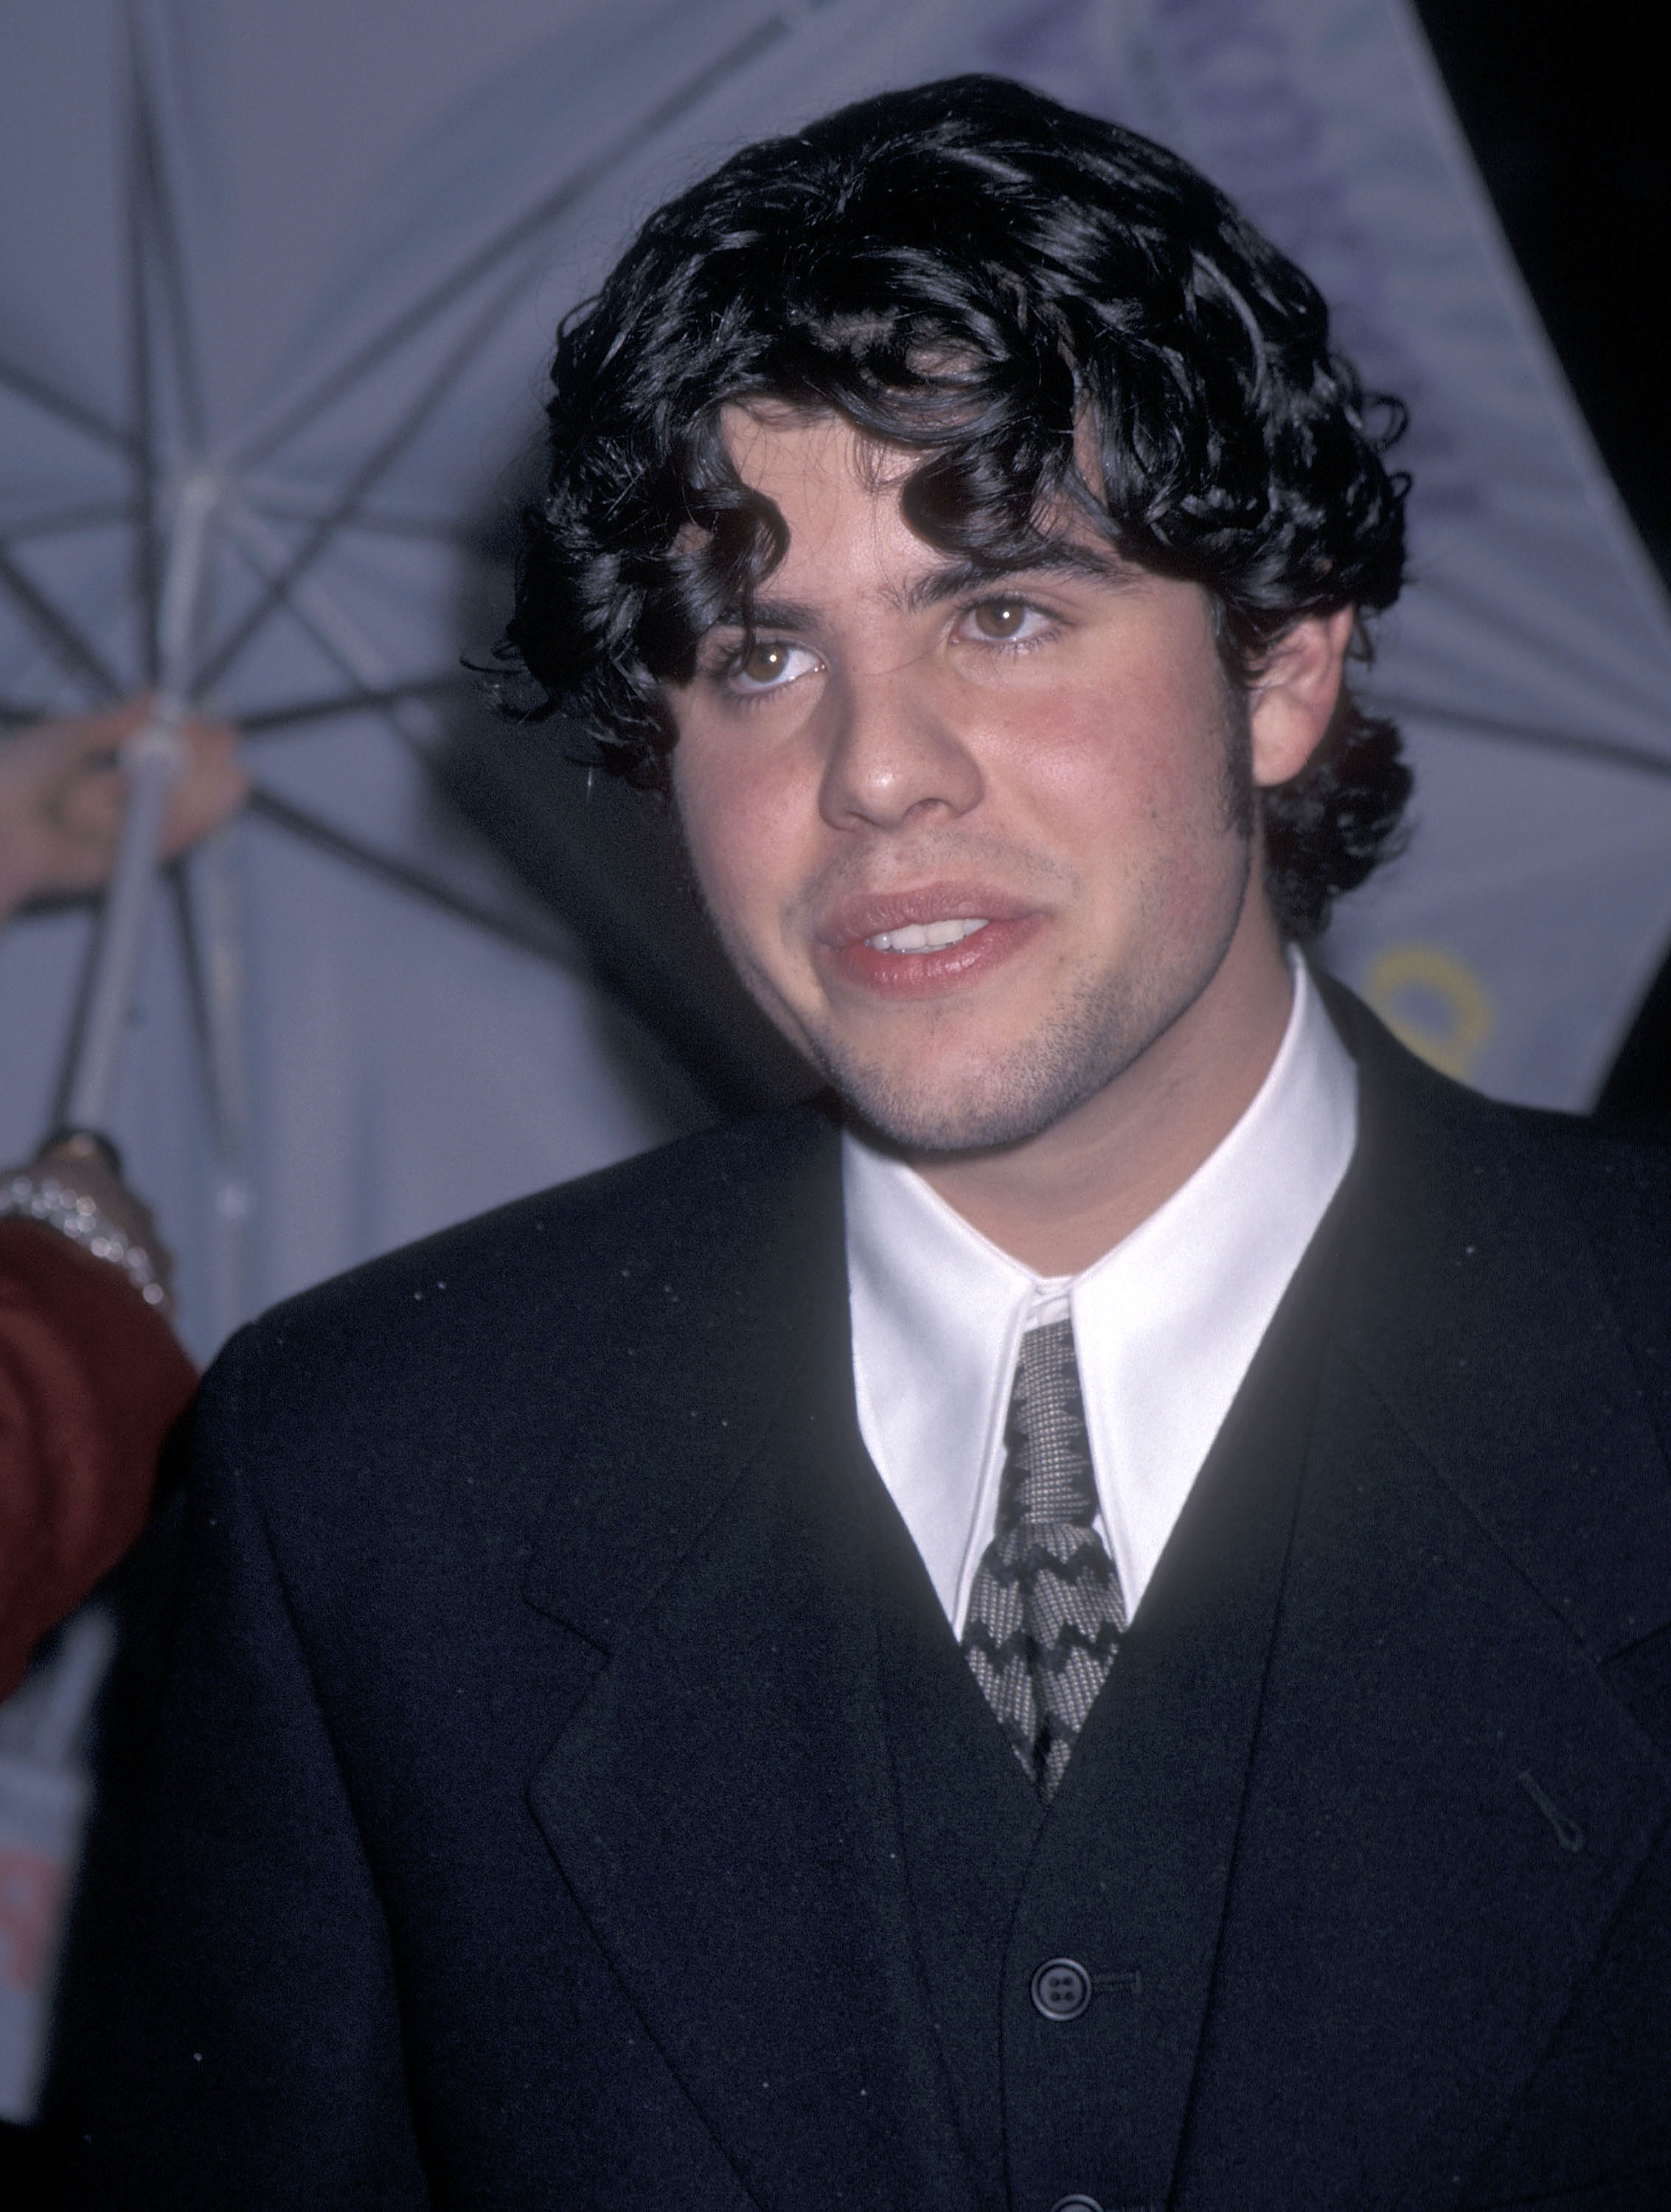 The boy at the "Daylight" premiere at the Mann's Chinese Theatre in Hollywood, California on December 5, 1996 | Source: Getty Images